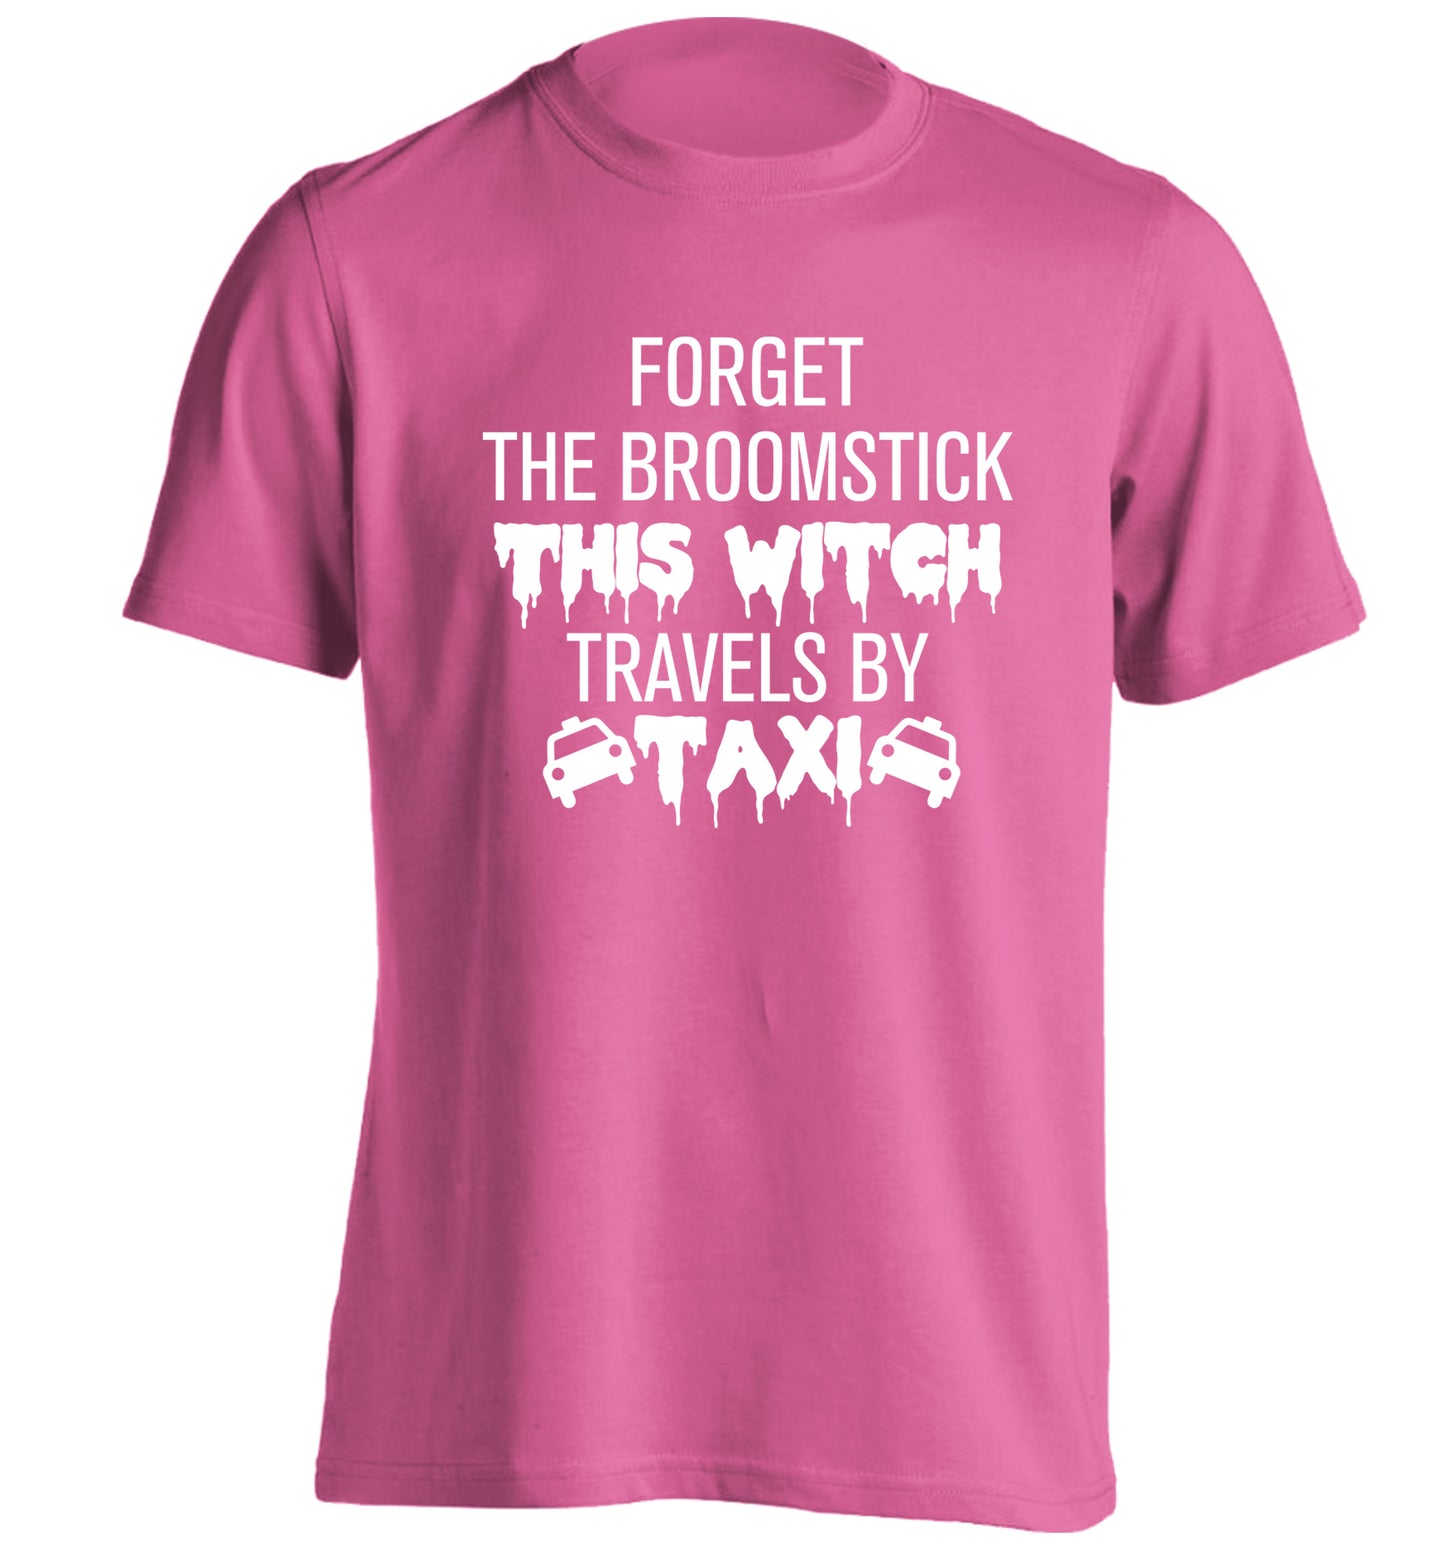 Forget the broomstick this witch travels by taxi adults unisexpink Tshirt 2XL